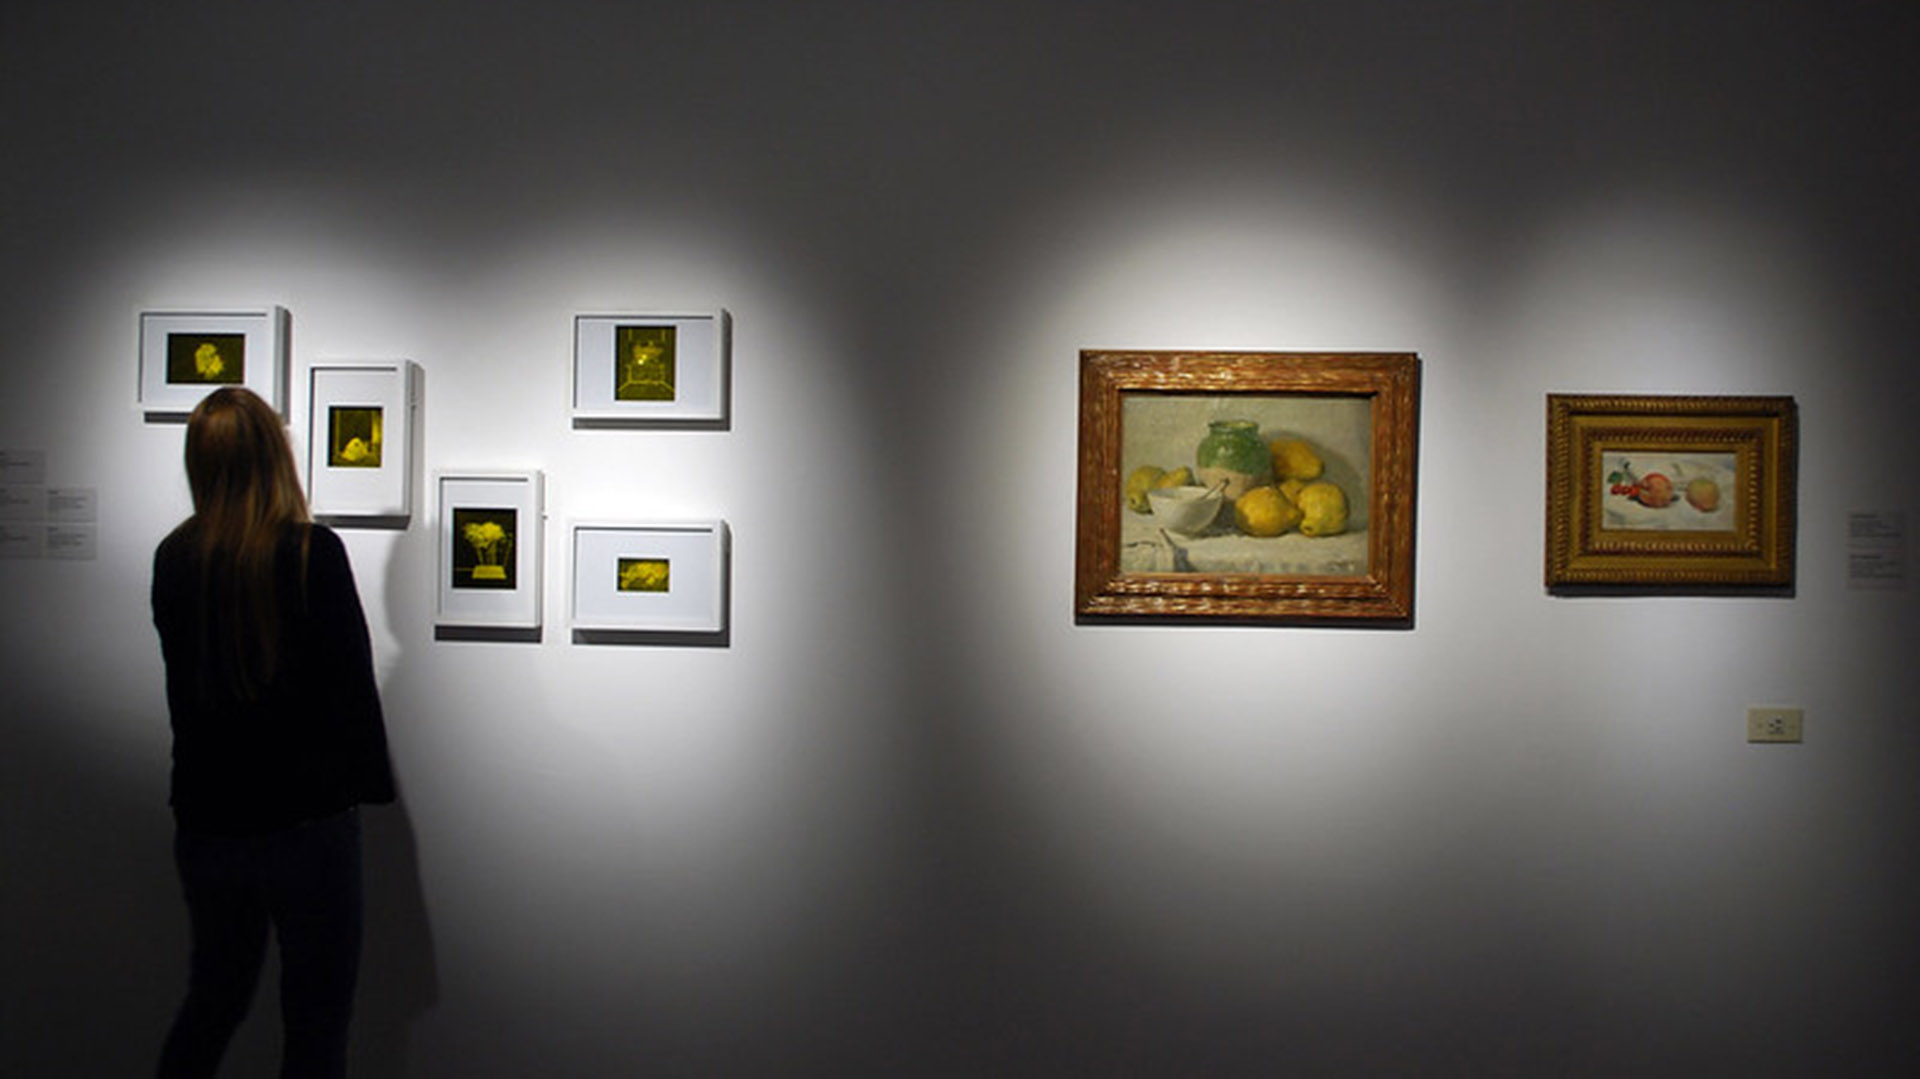 On the left, works by Werf alongside oil paintings by Lia Correa Morales and Renoir 